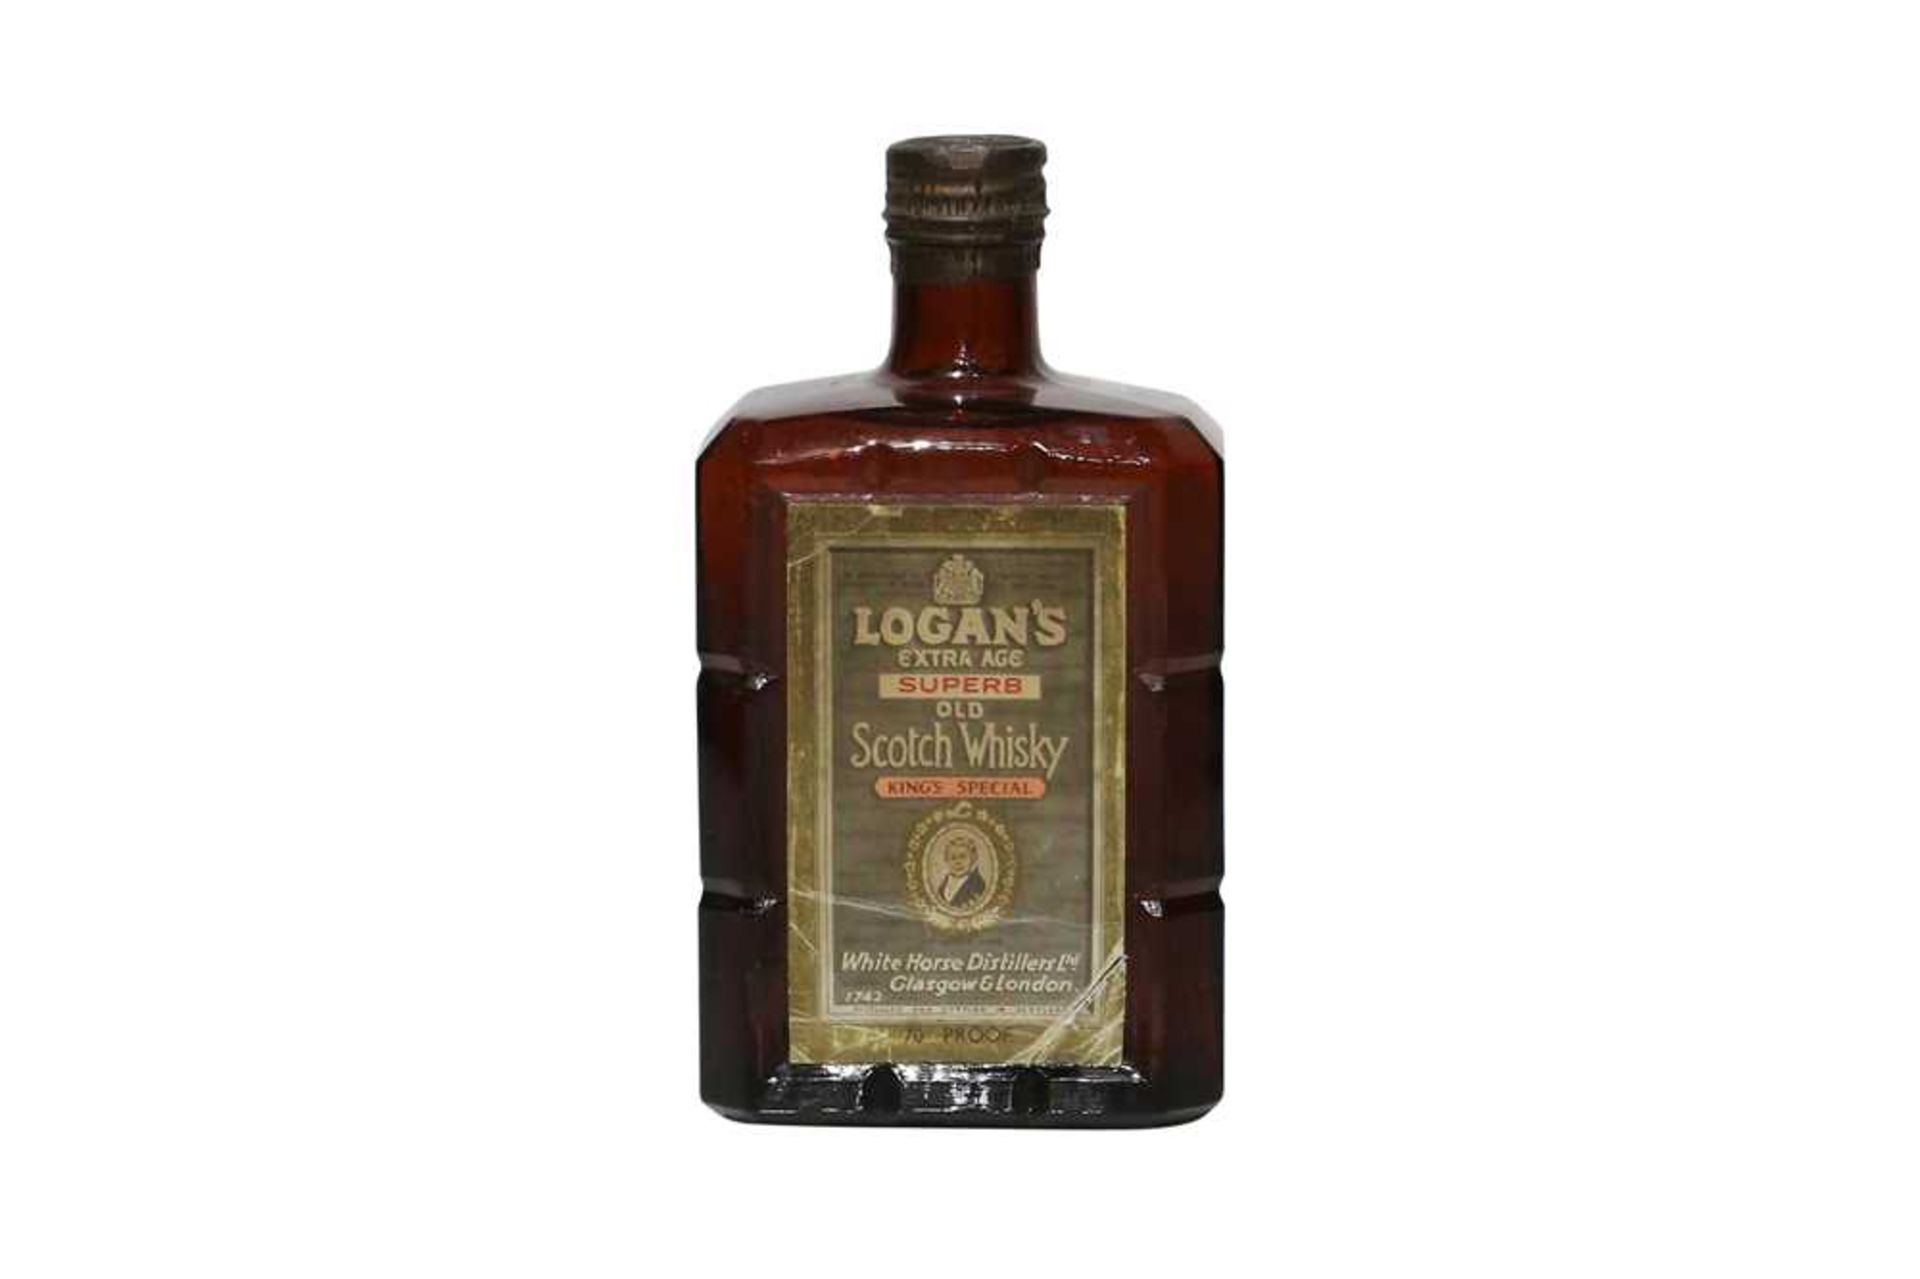 Logans, King’s Special, Extra Age Superb Old Scotch Whisky, 1960s bottling